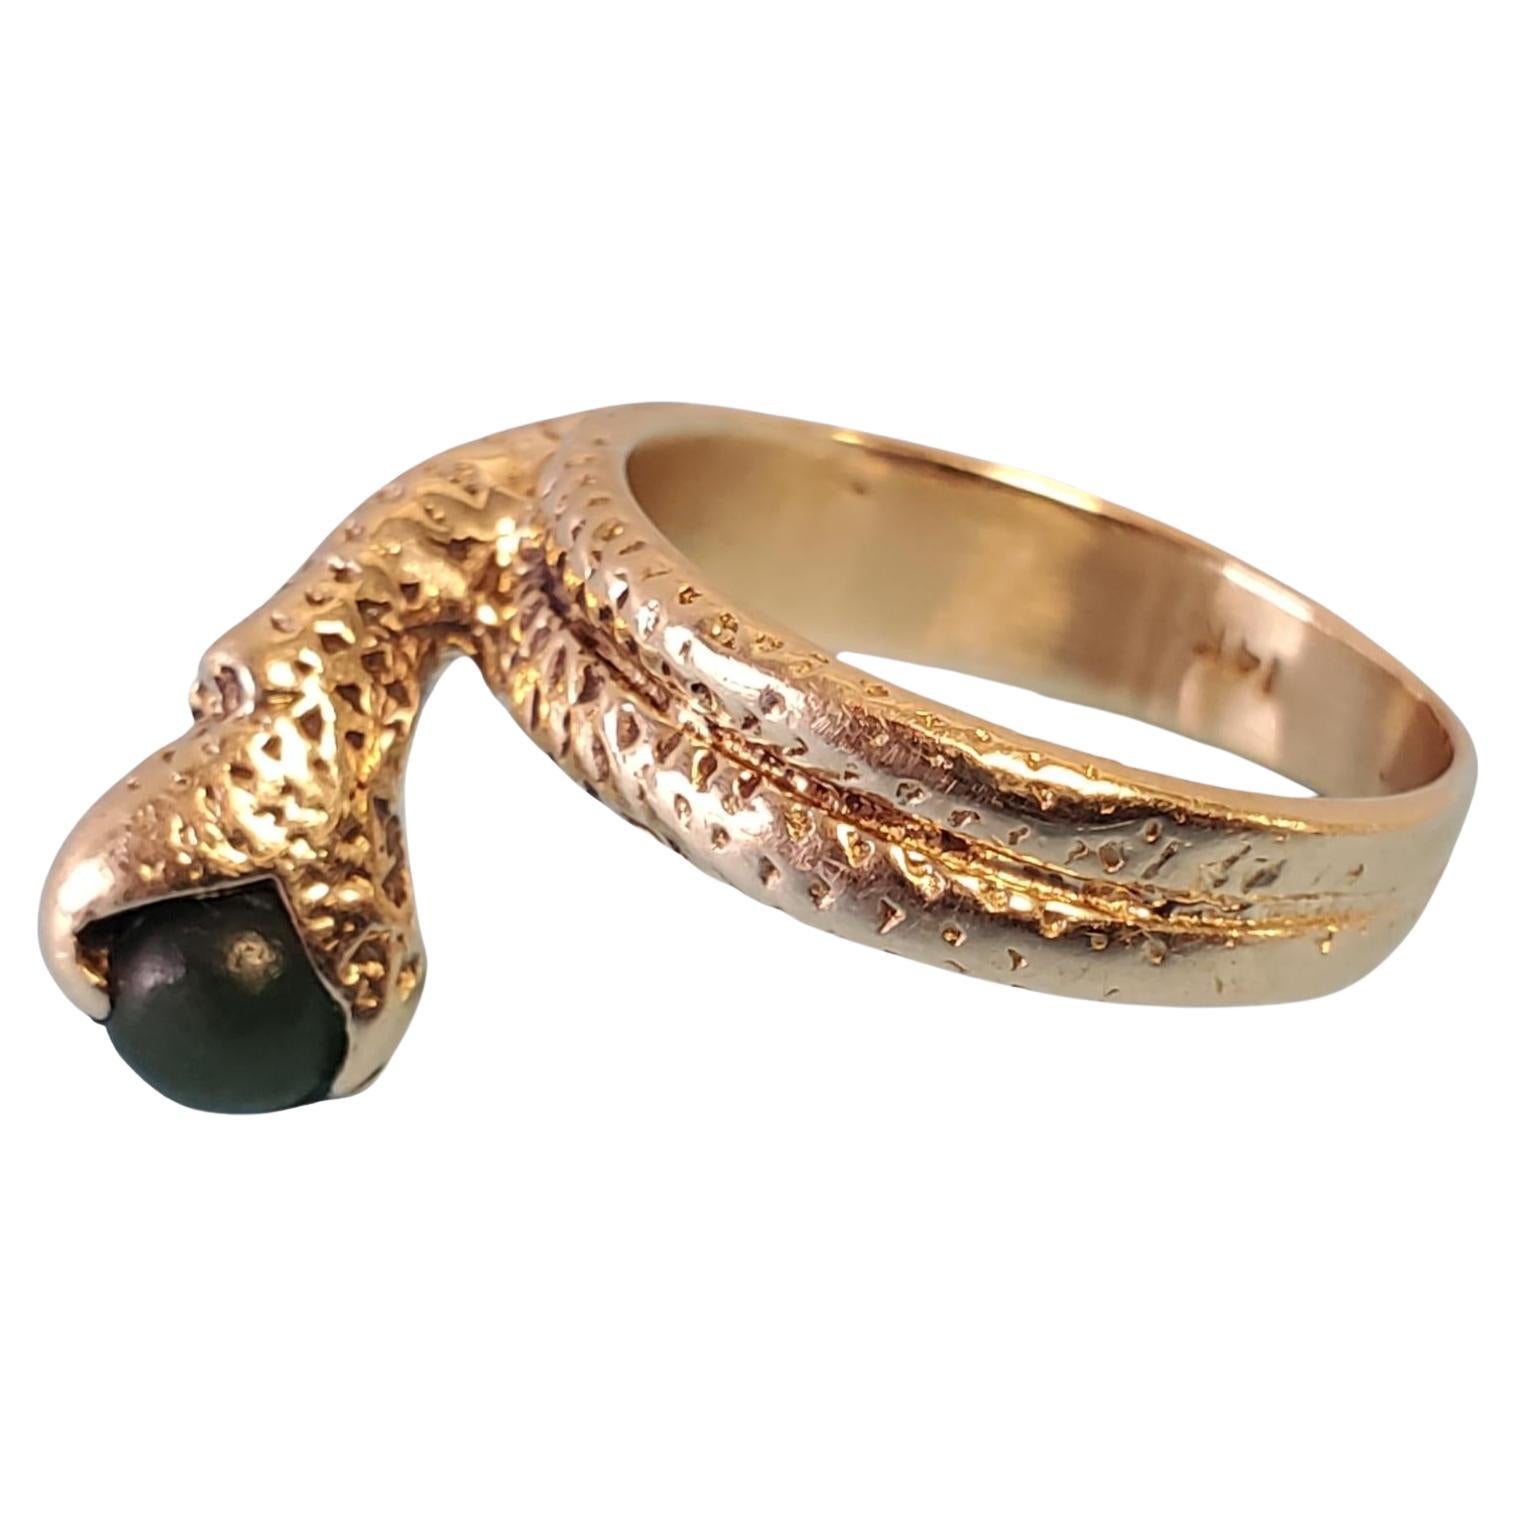 Vintage Old Snake Ring 14k Yellow Gold Signed Kimberly For Sale